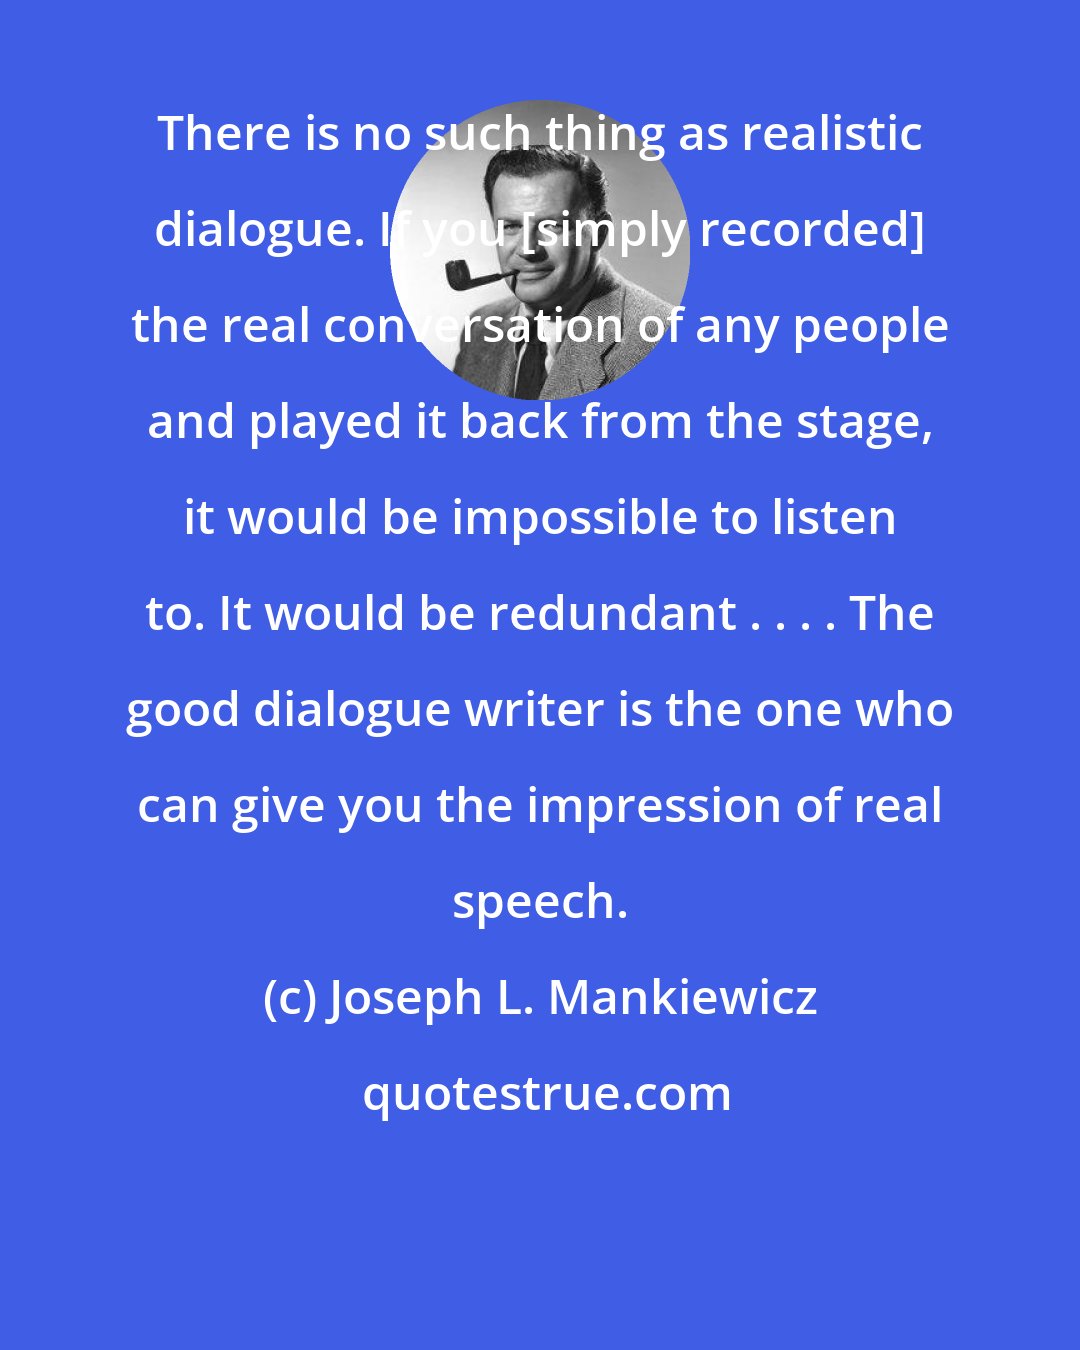 Joseph L. Mankiewicz: There is no such thing as realistic dialogue. If you [simply recorded] the real conversation of any people and played it back from the stage, it would be impossible to listen to. It would be redundant . . . . The good dialogue writer is the one who can give you the impression of real speech.